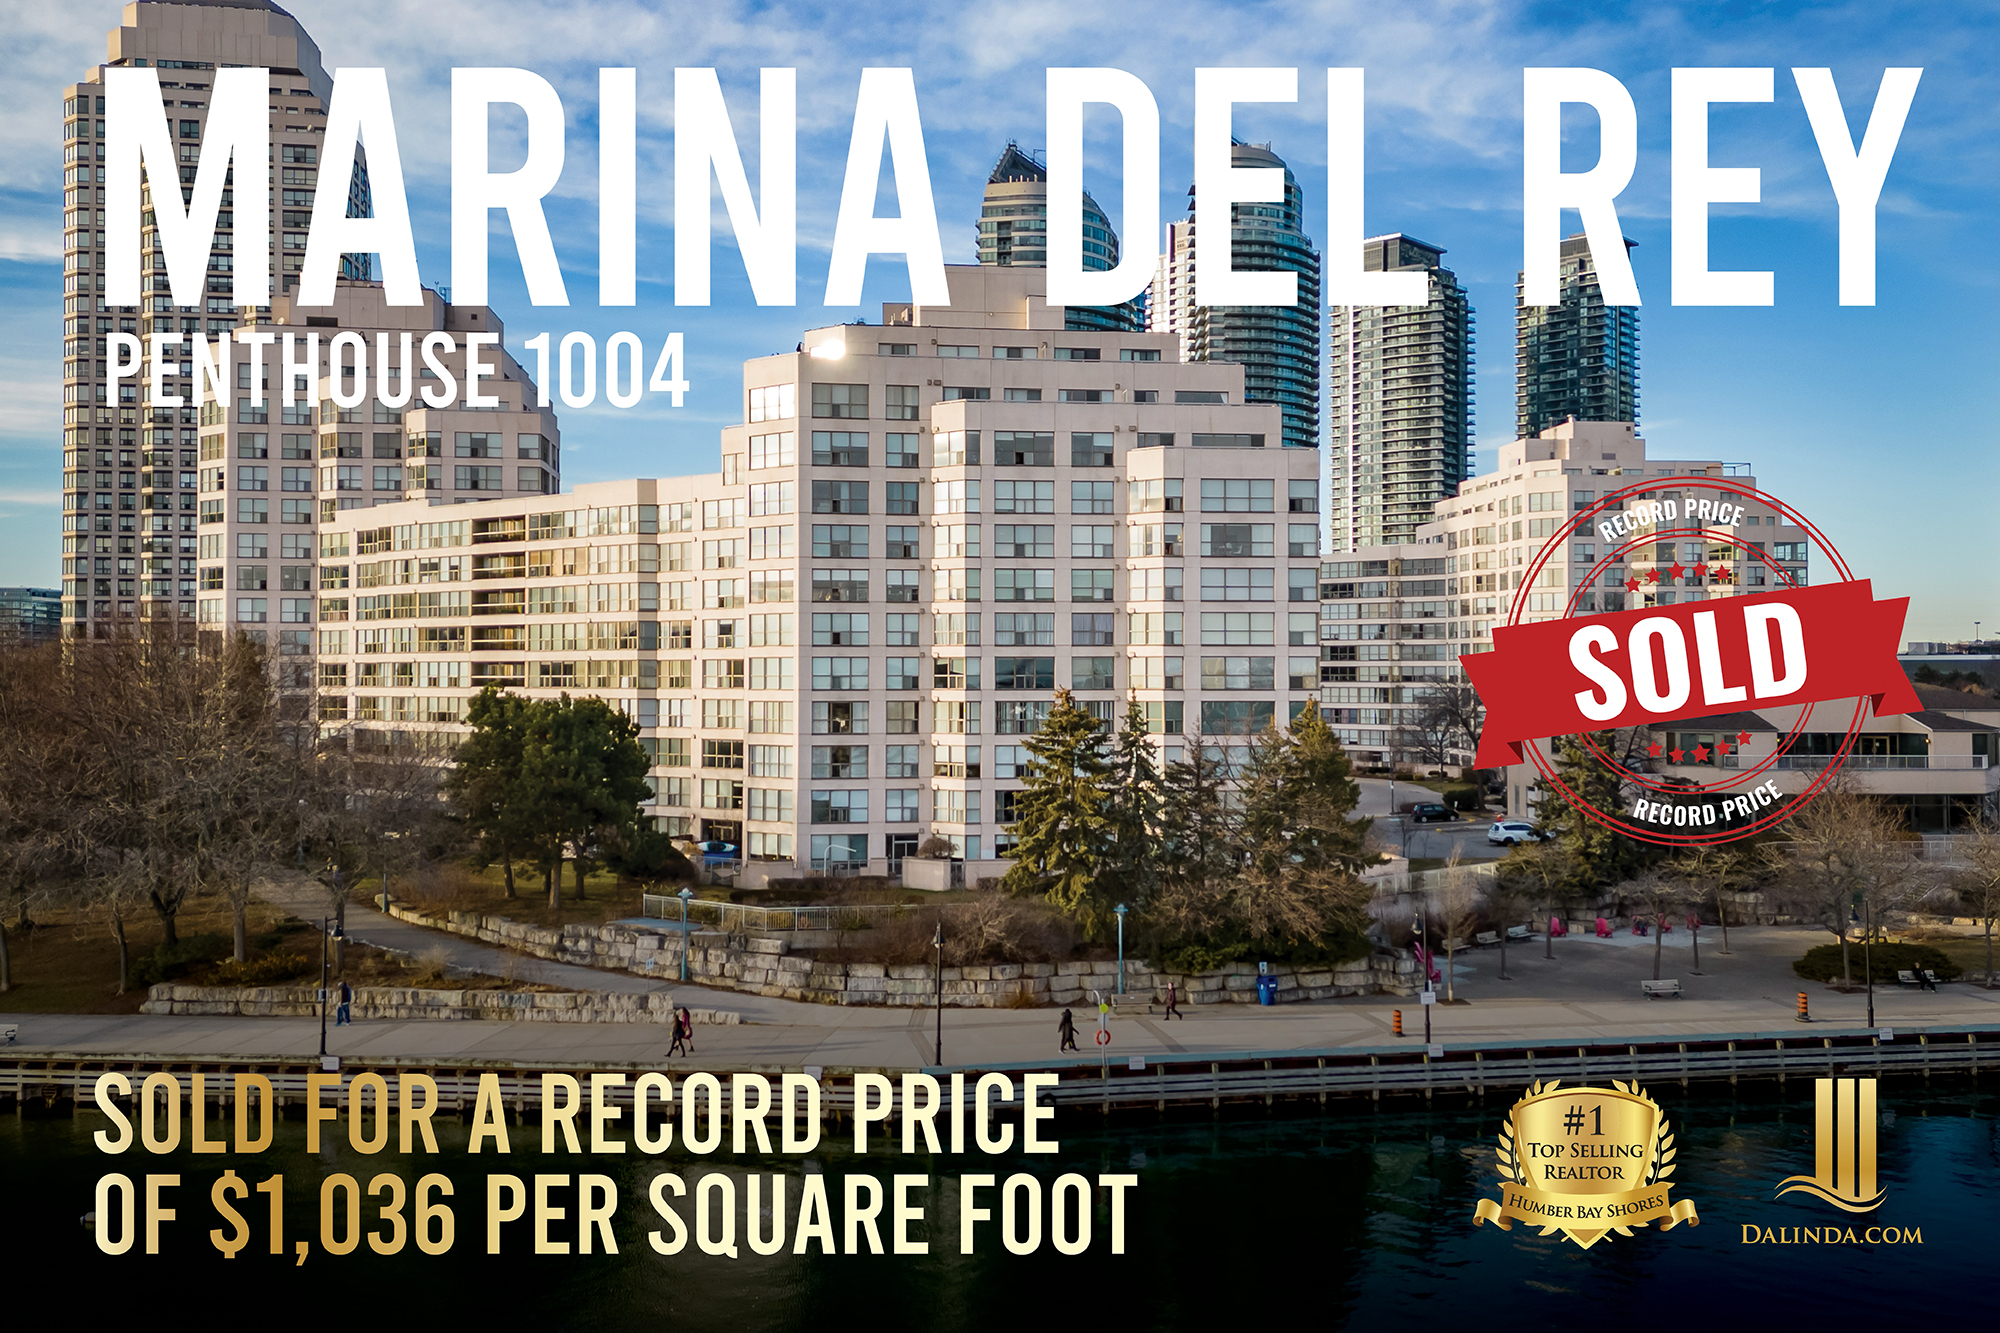 Penthouse 1004 Marina Del Rey Sold for Record Price